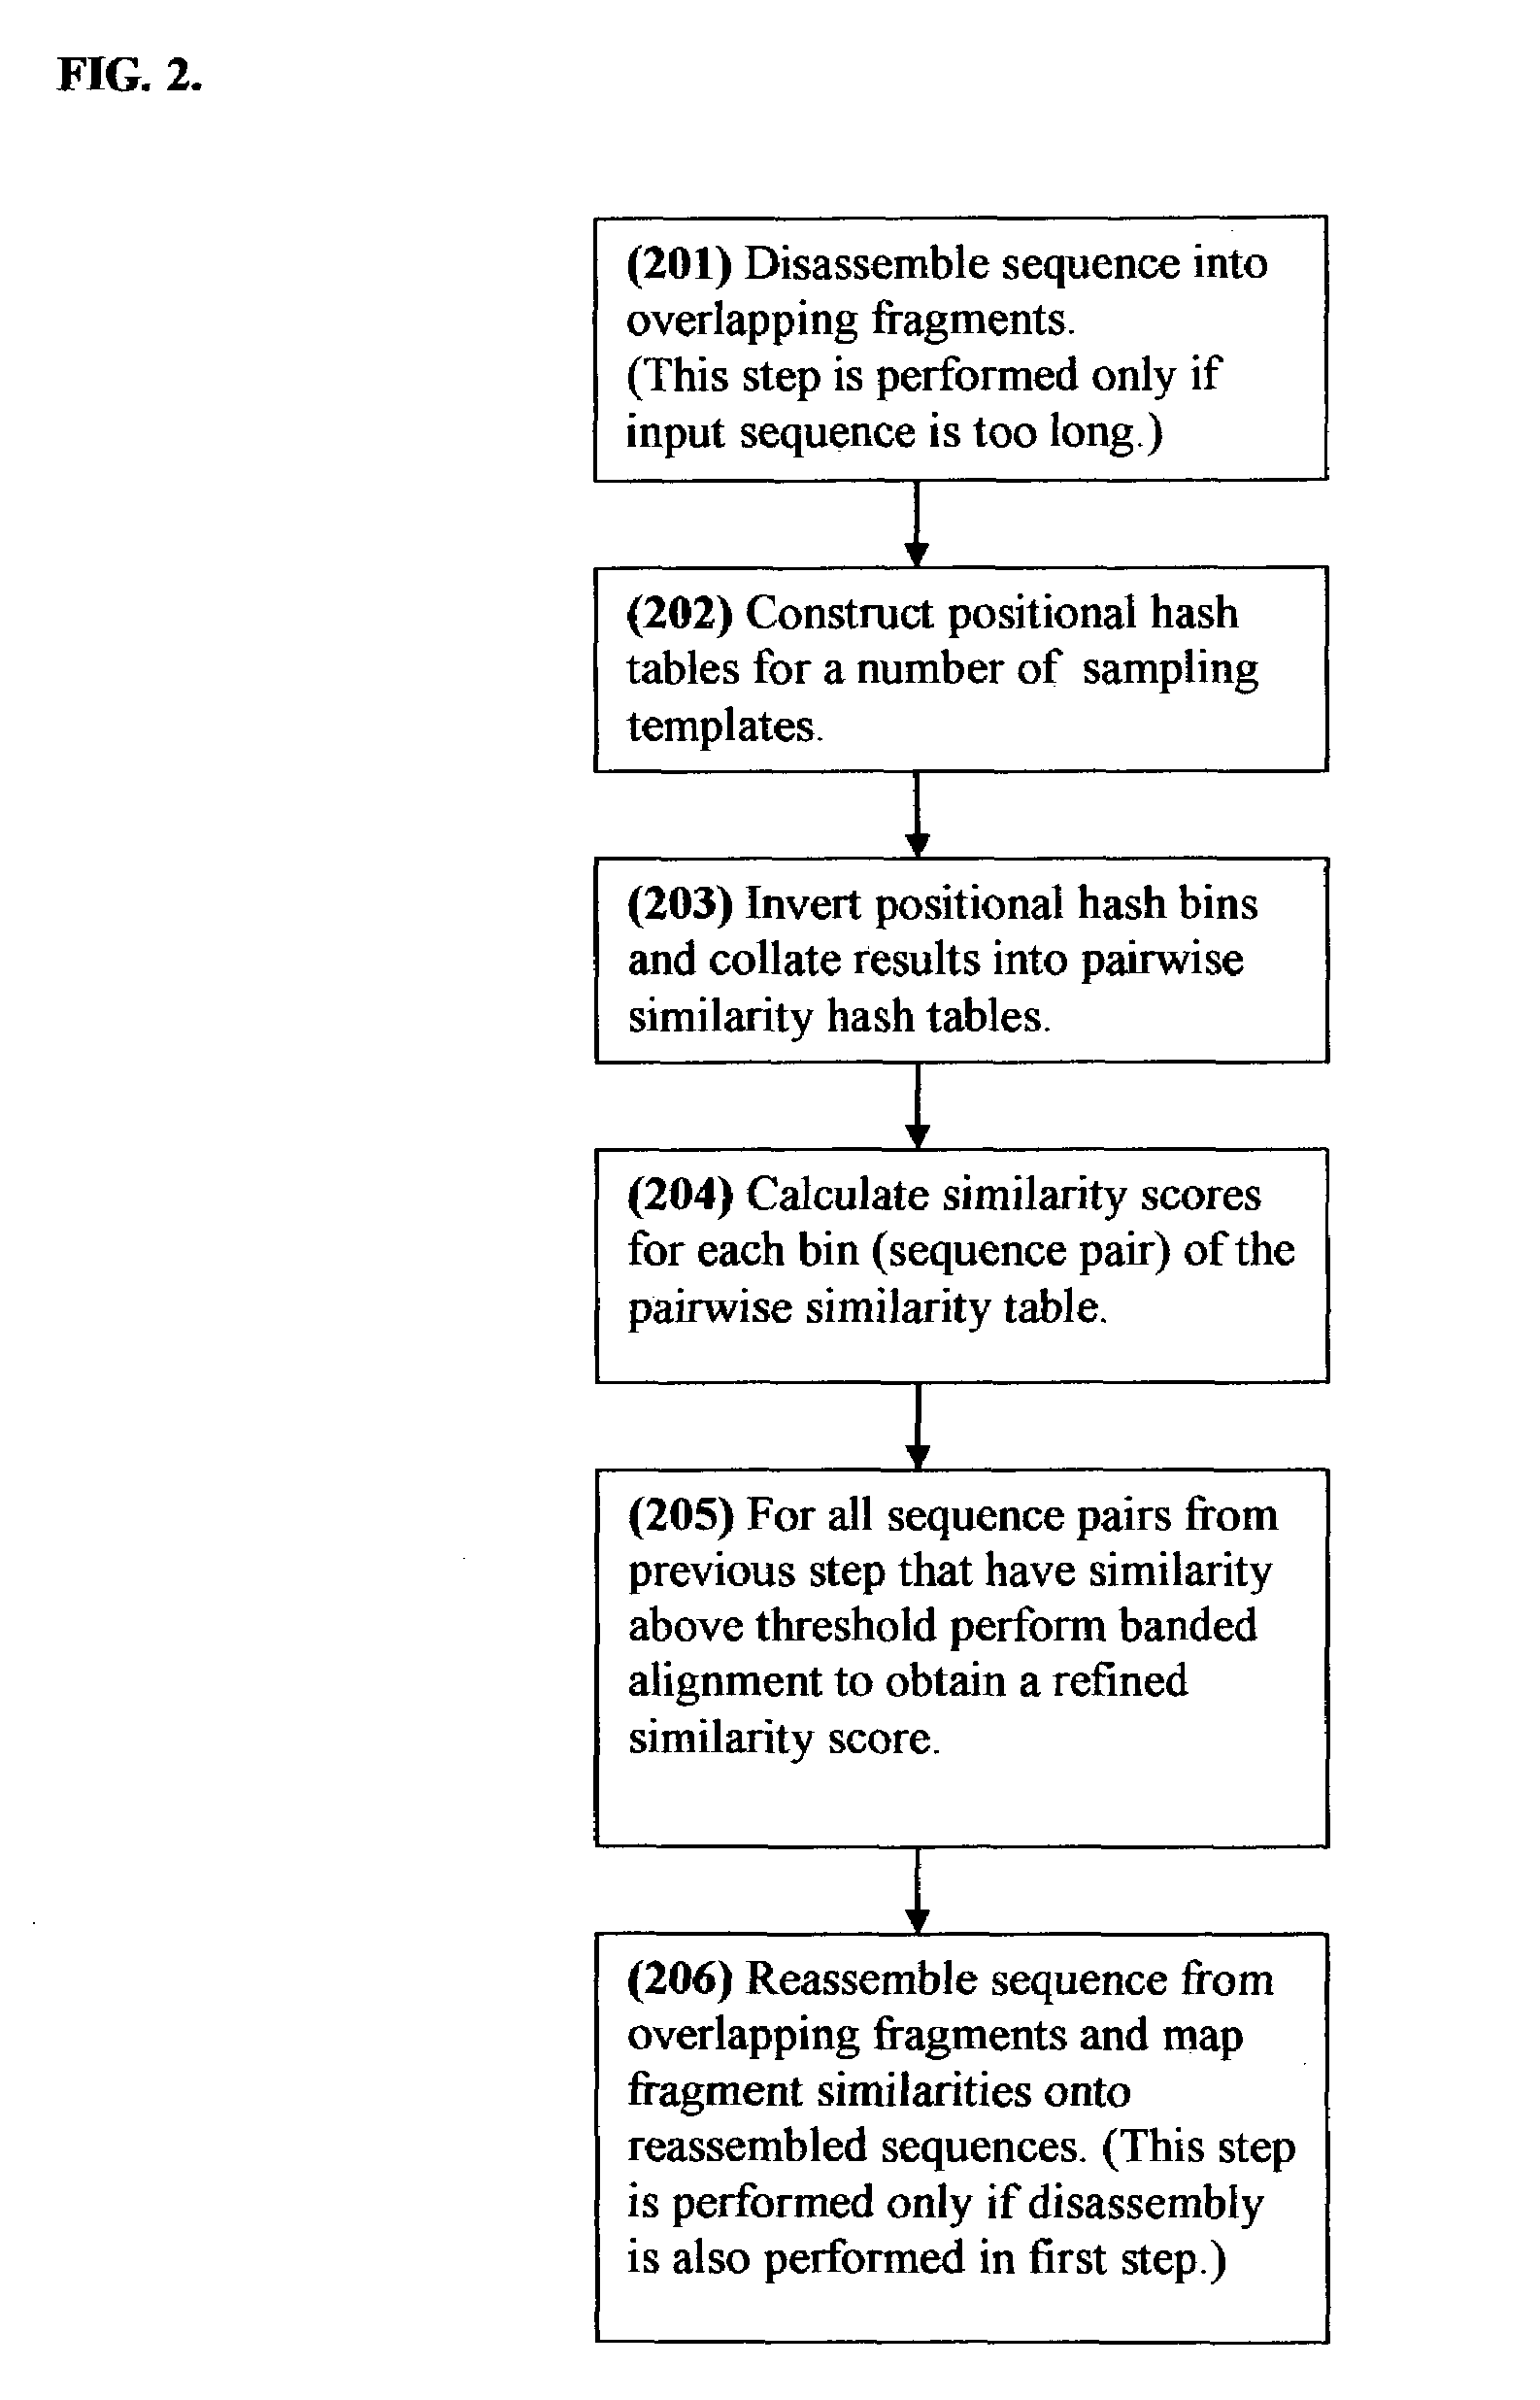 Positional hashing method for performing DNA sequence similarity search